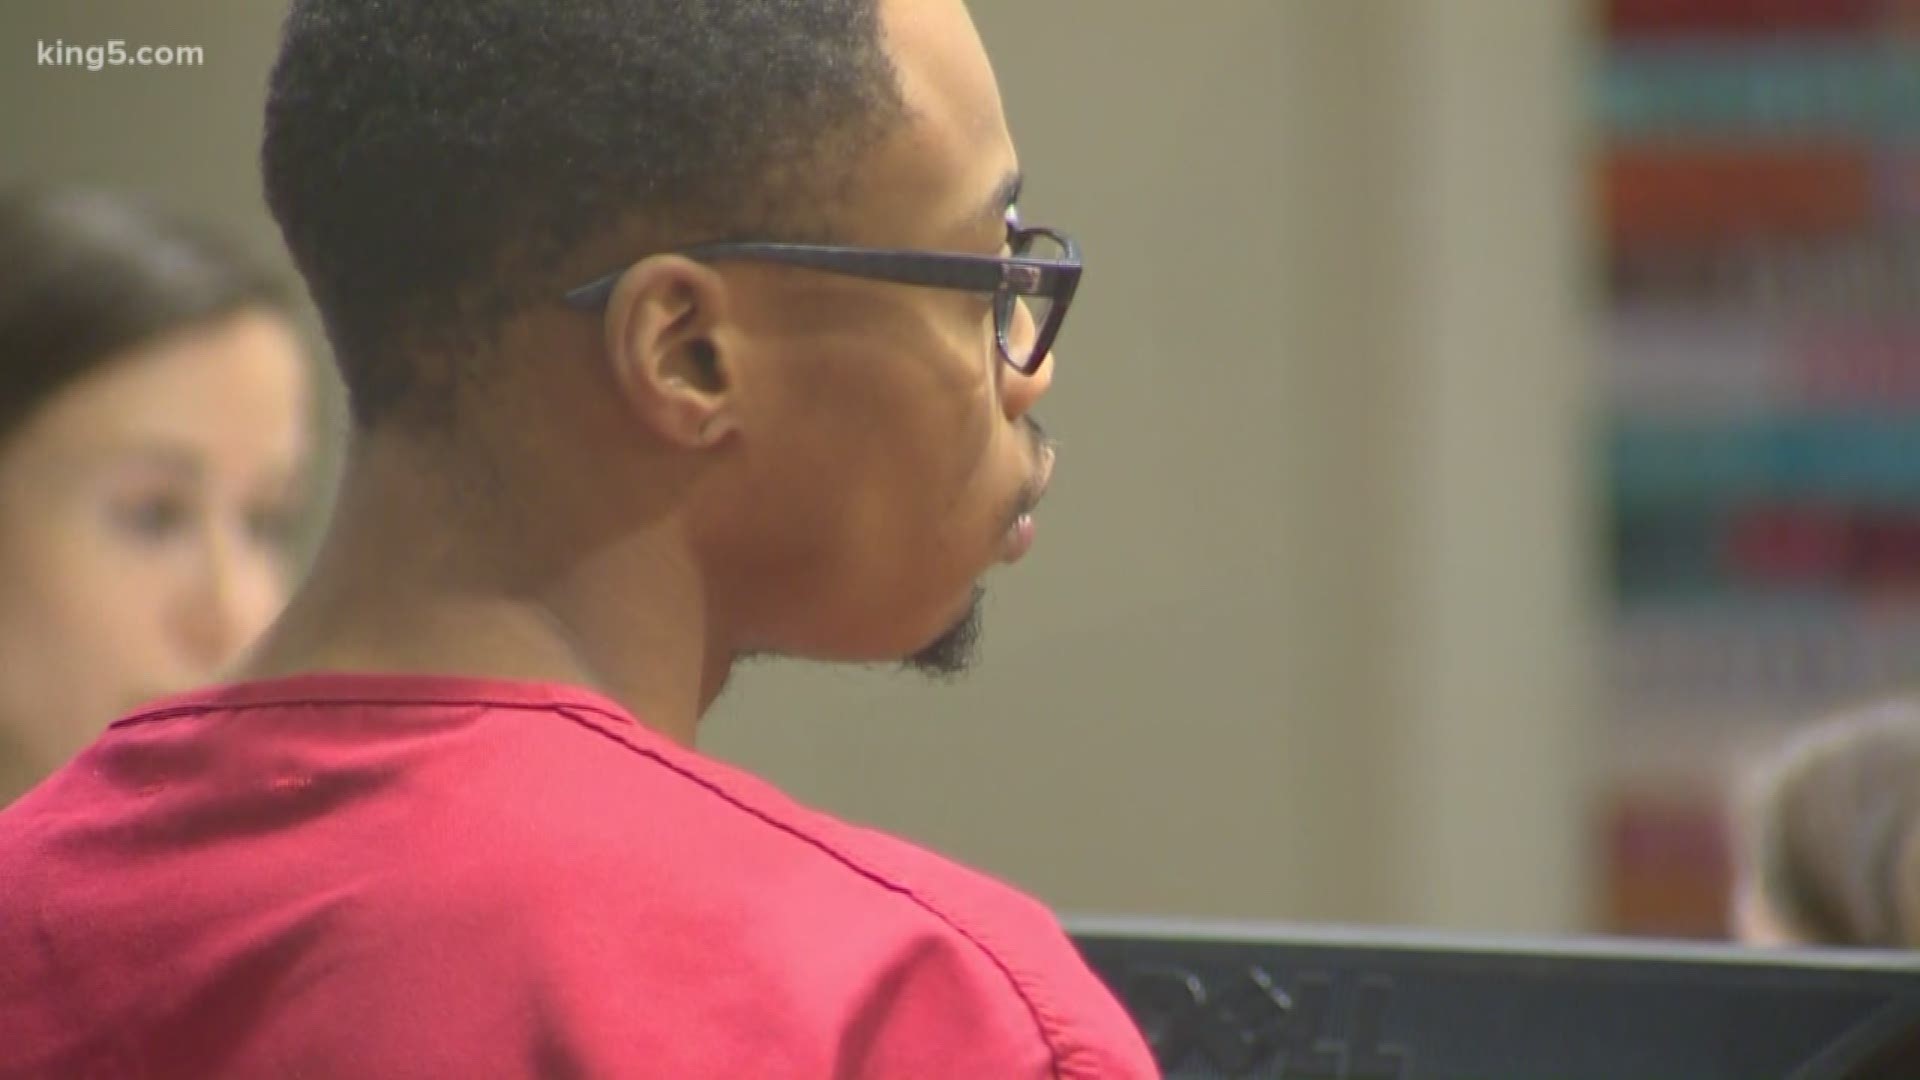 Jamel Jackson, 21, plead not guilty to unlawful possession of a firearm in the first degree.